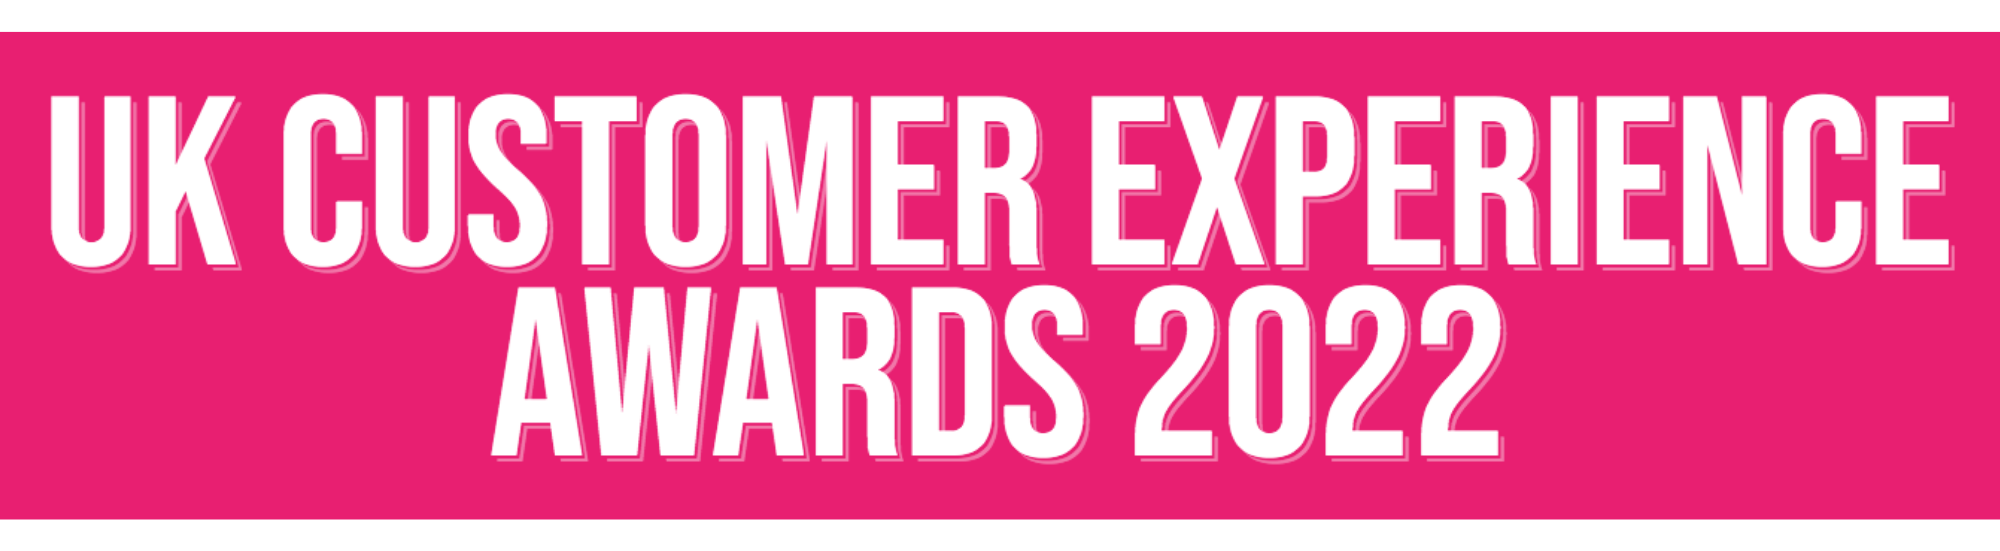 The UK Customer Experience Awards 2022 are now open